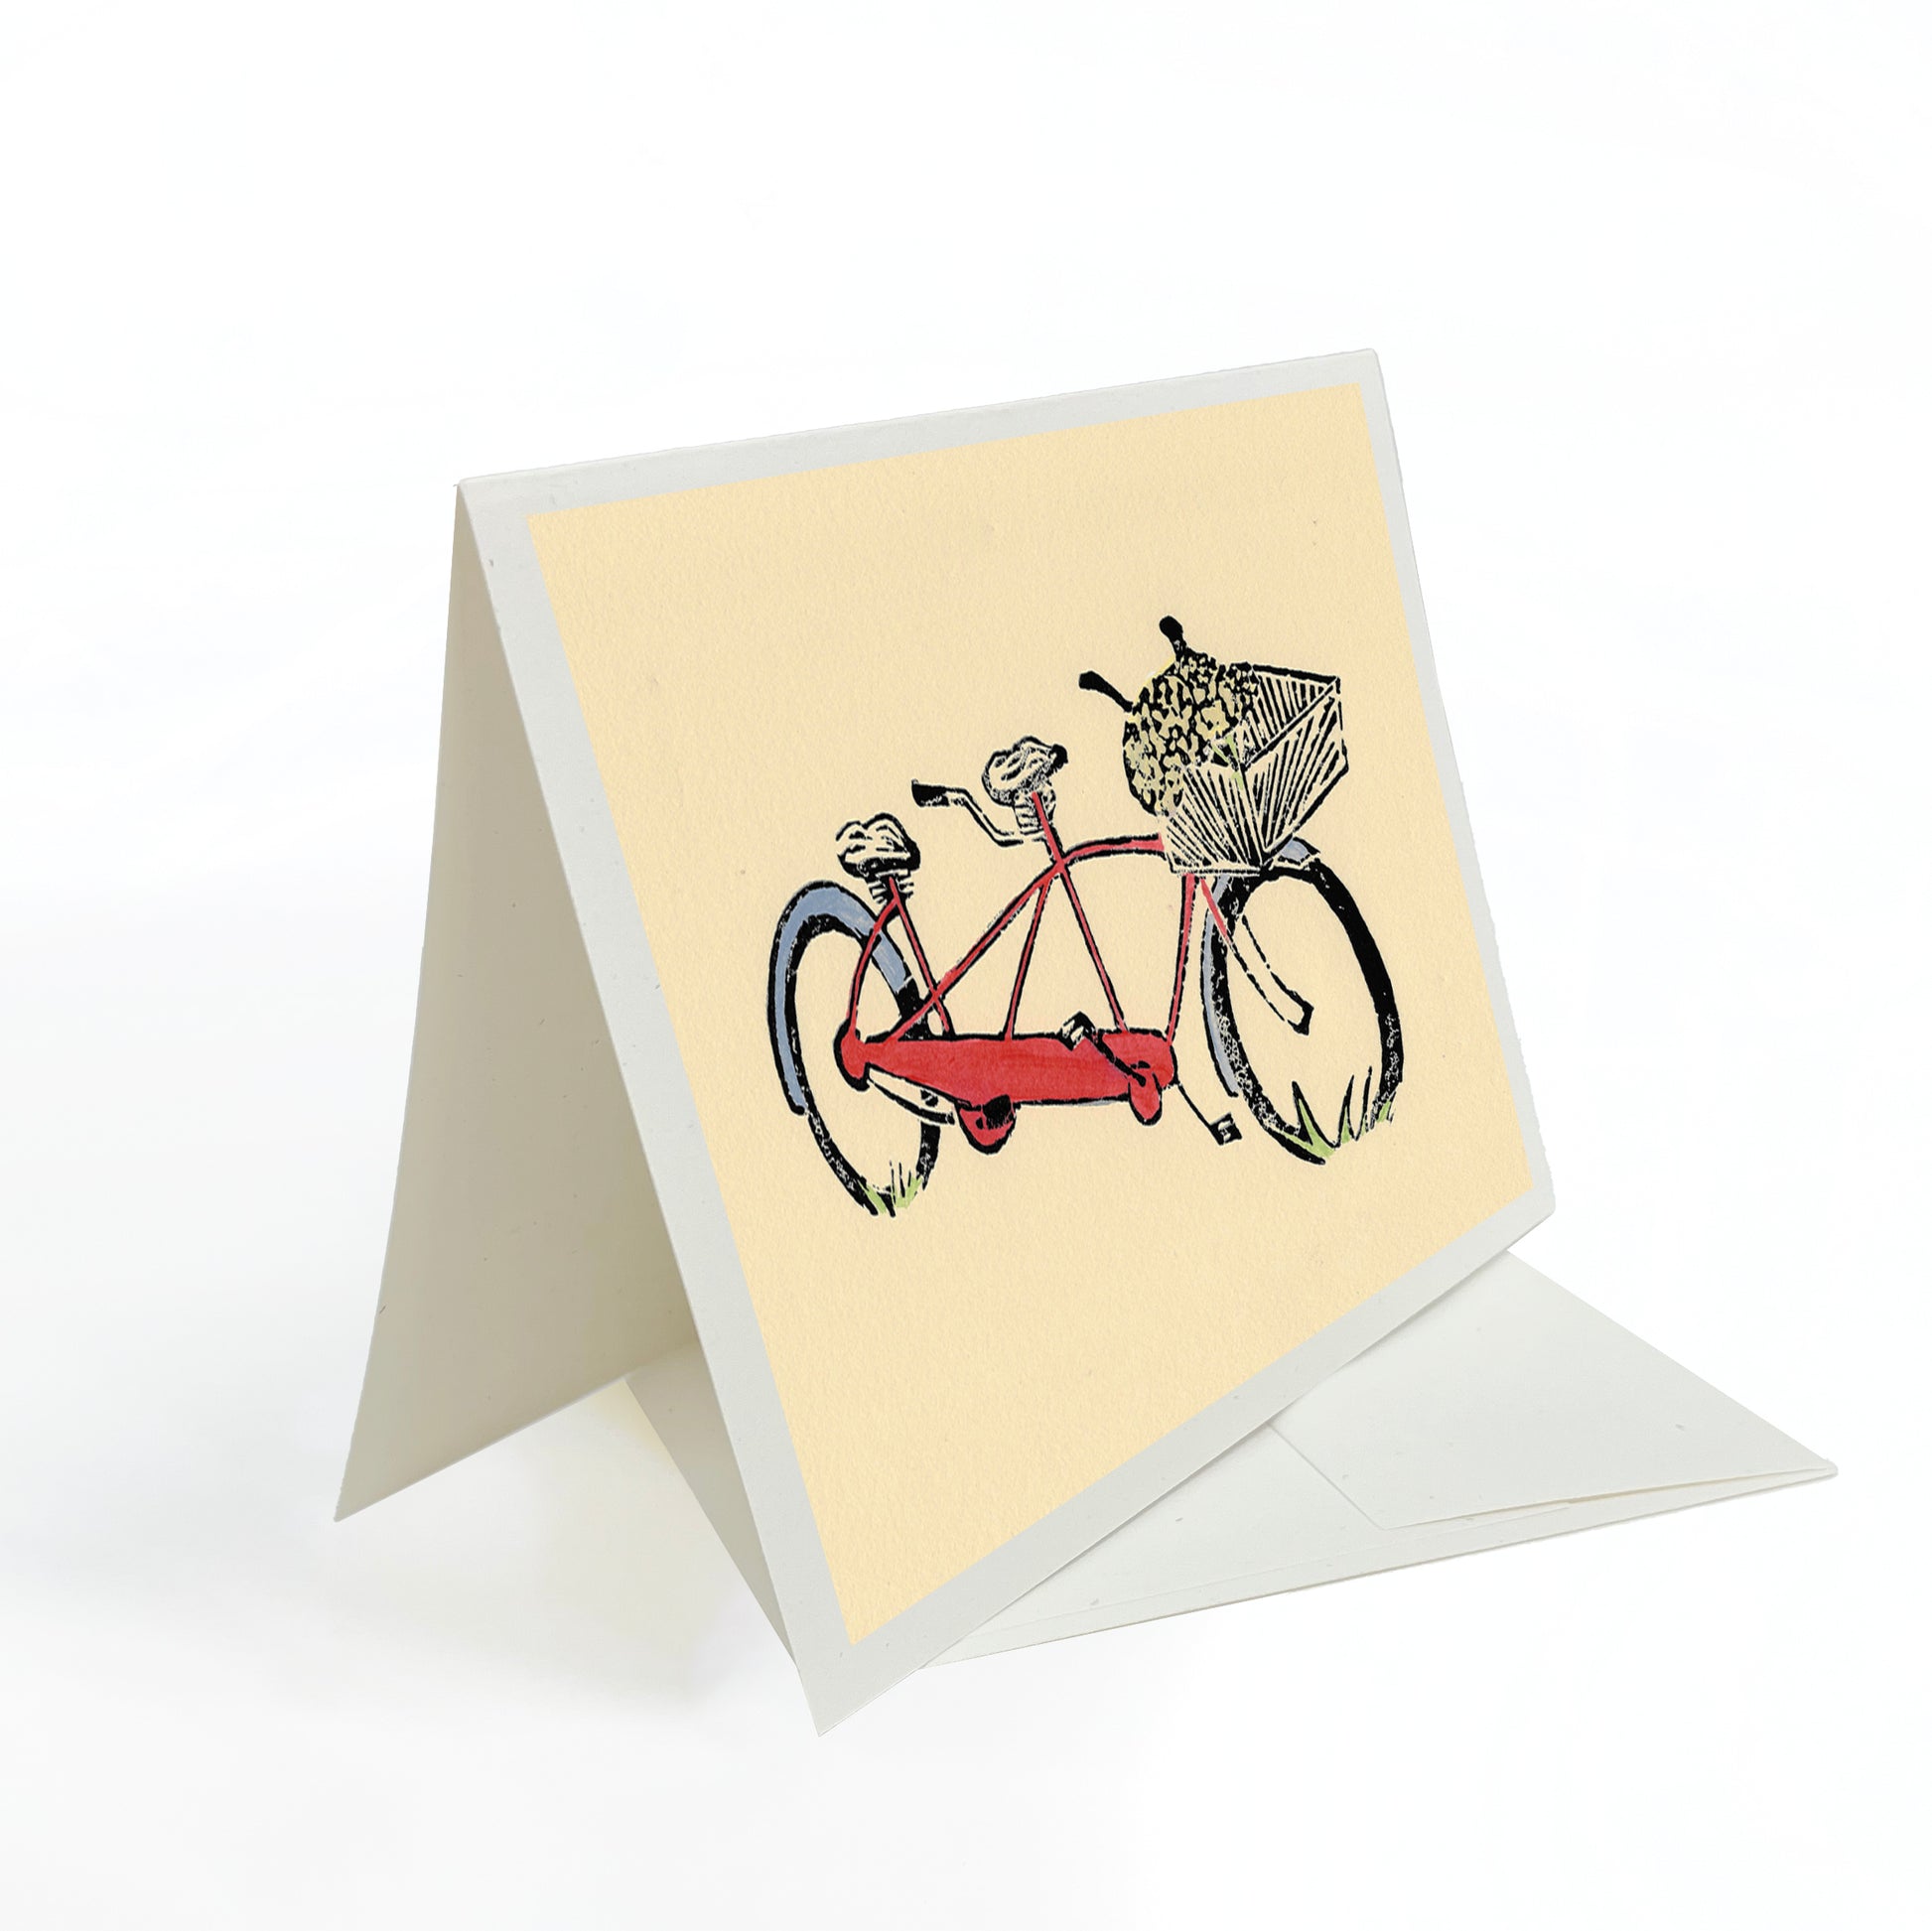 A casually elegant card featuring bicycle art by Natalia Wohletz titled Red Tandem.